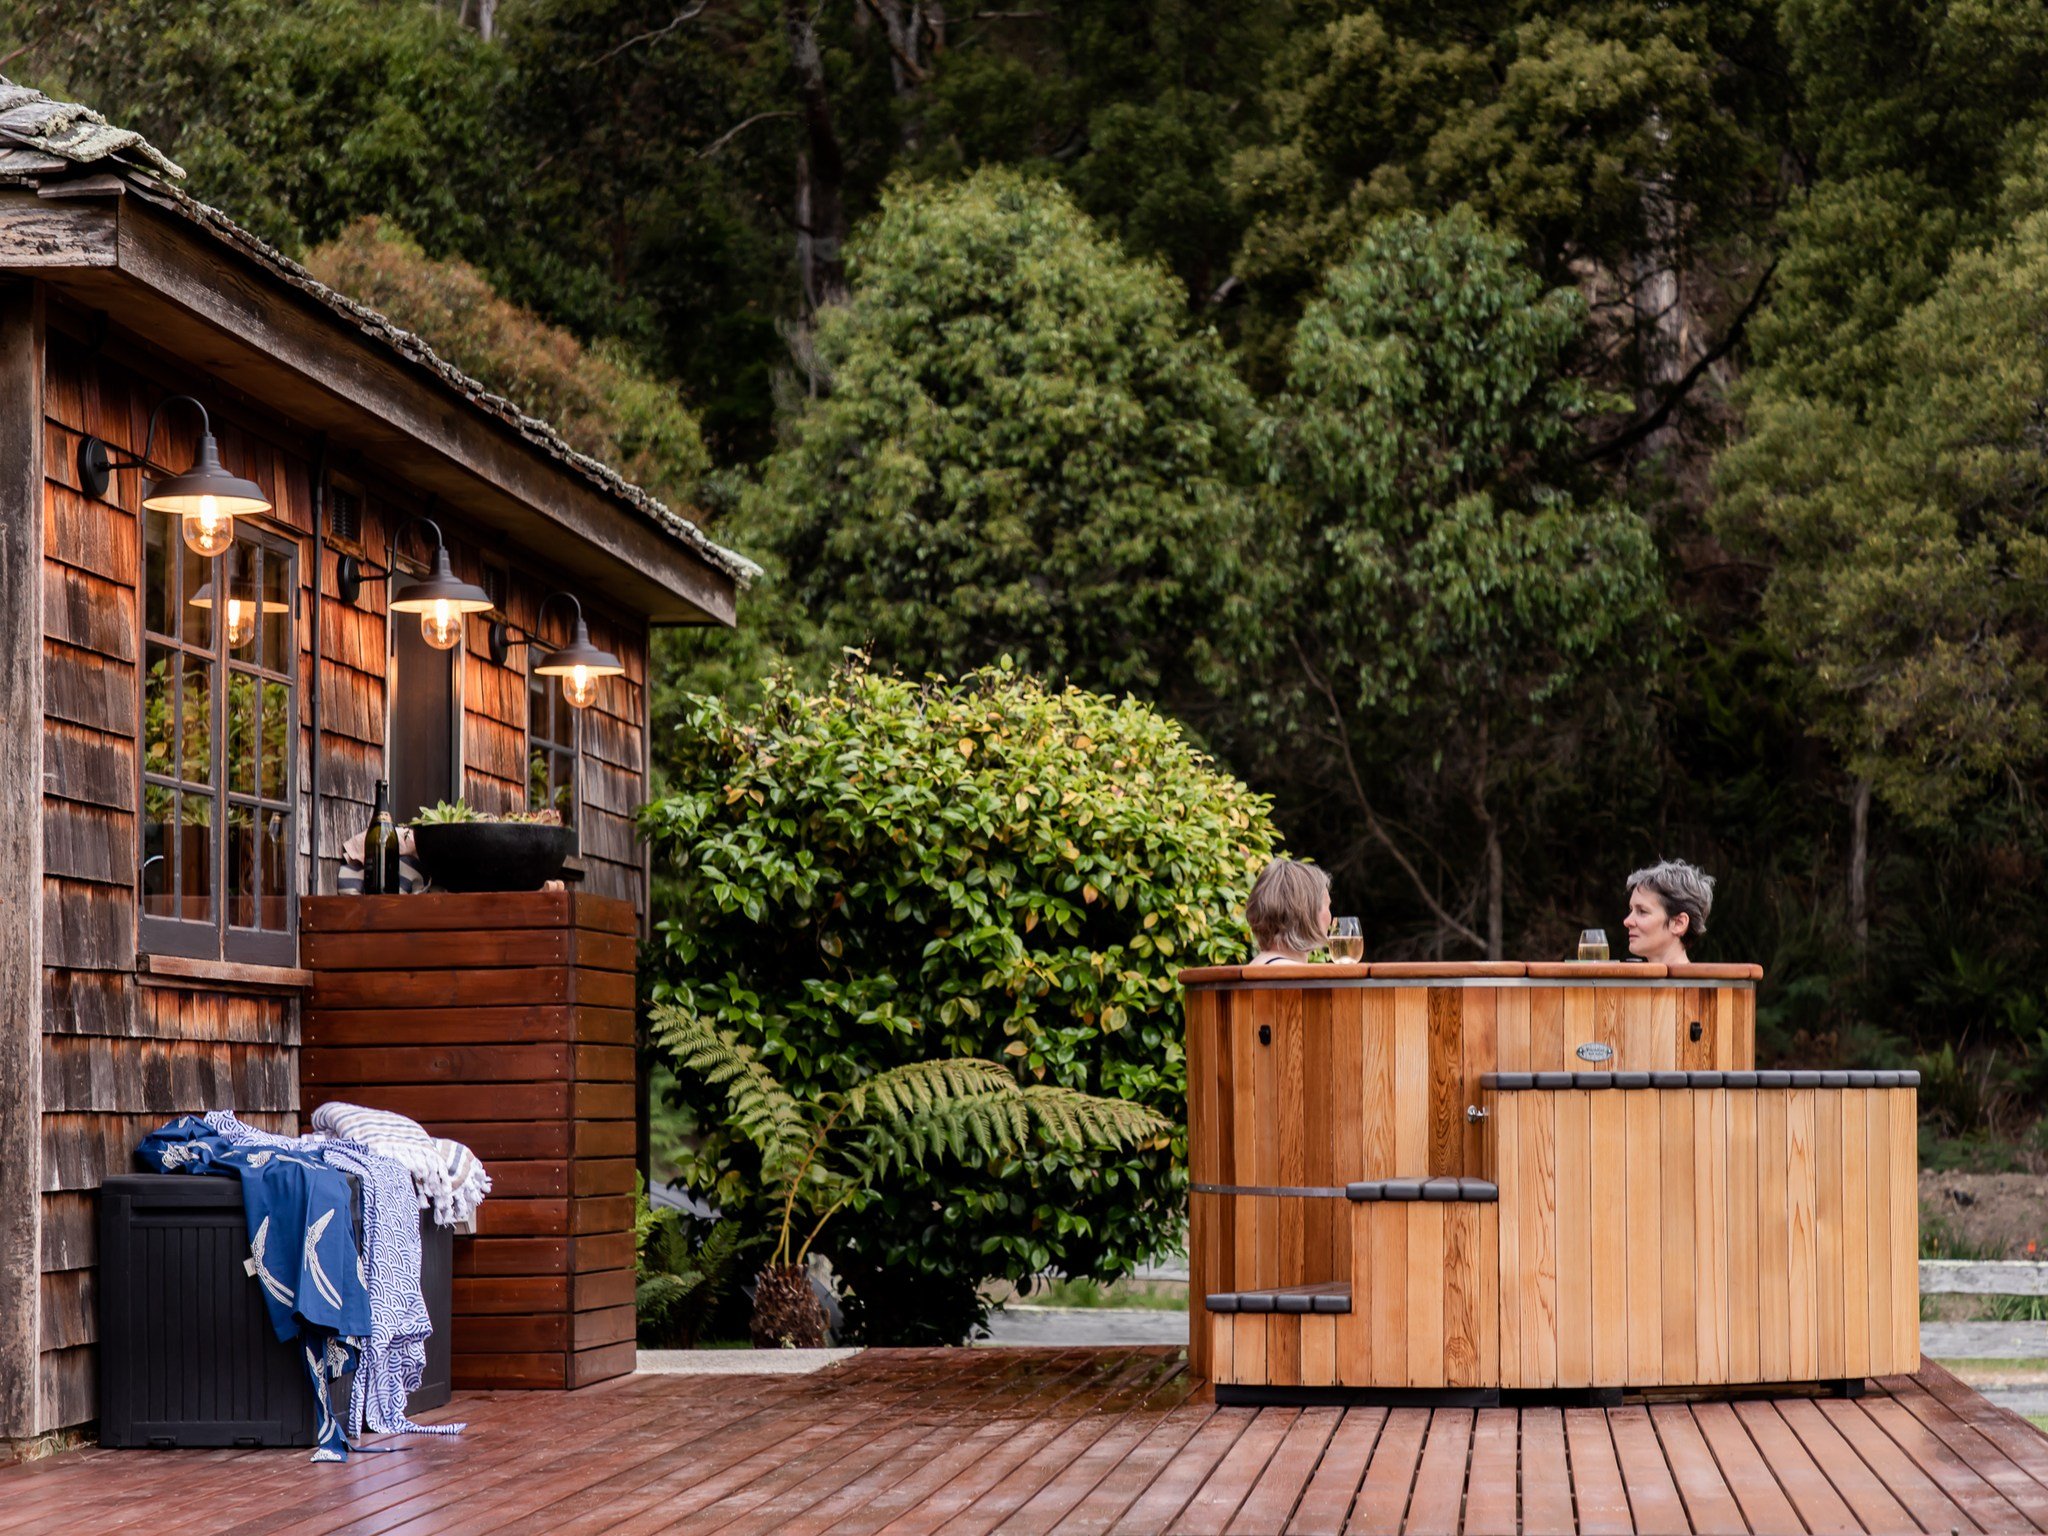 Grab your favourite person and take off for a few days of nature-based goodness.

Relax in the cedar hot tub under the stars and let everything else melt away.

📷 @natashamulhallphotography 
____________________________________
#CedarCottageMeander 